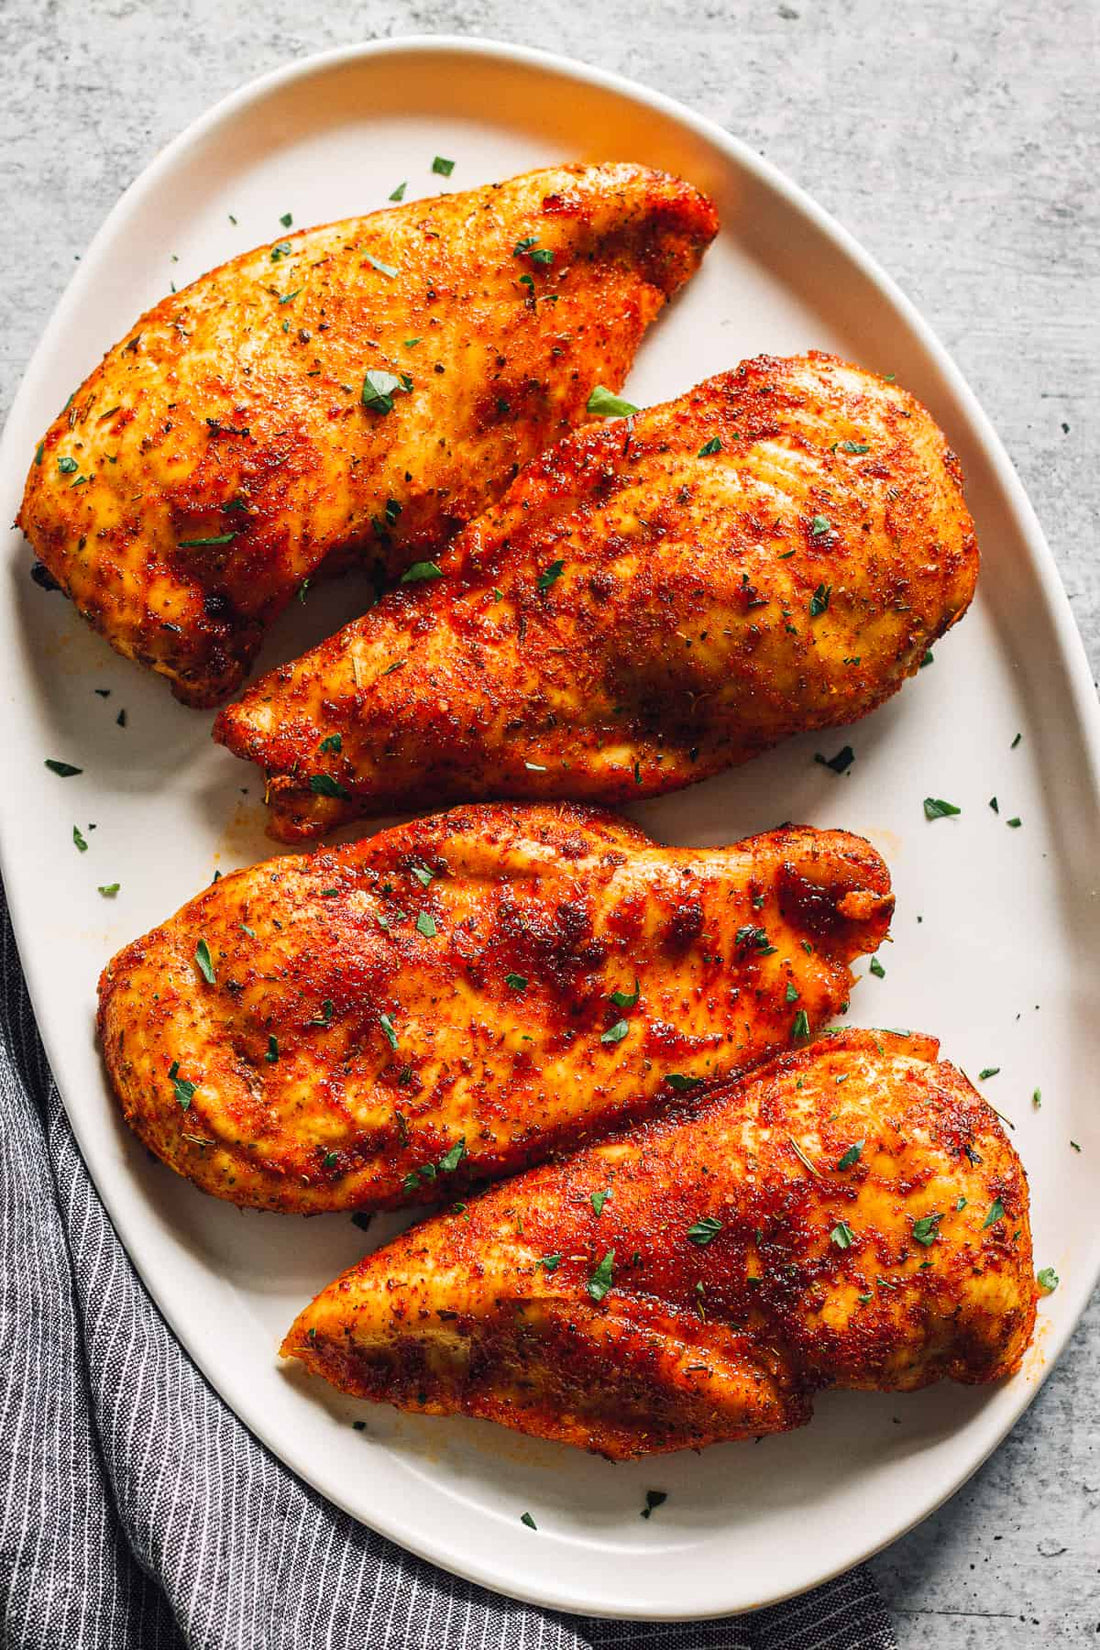 Baked Chicken Breast (The Best)